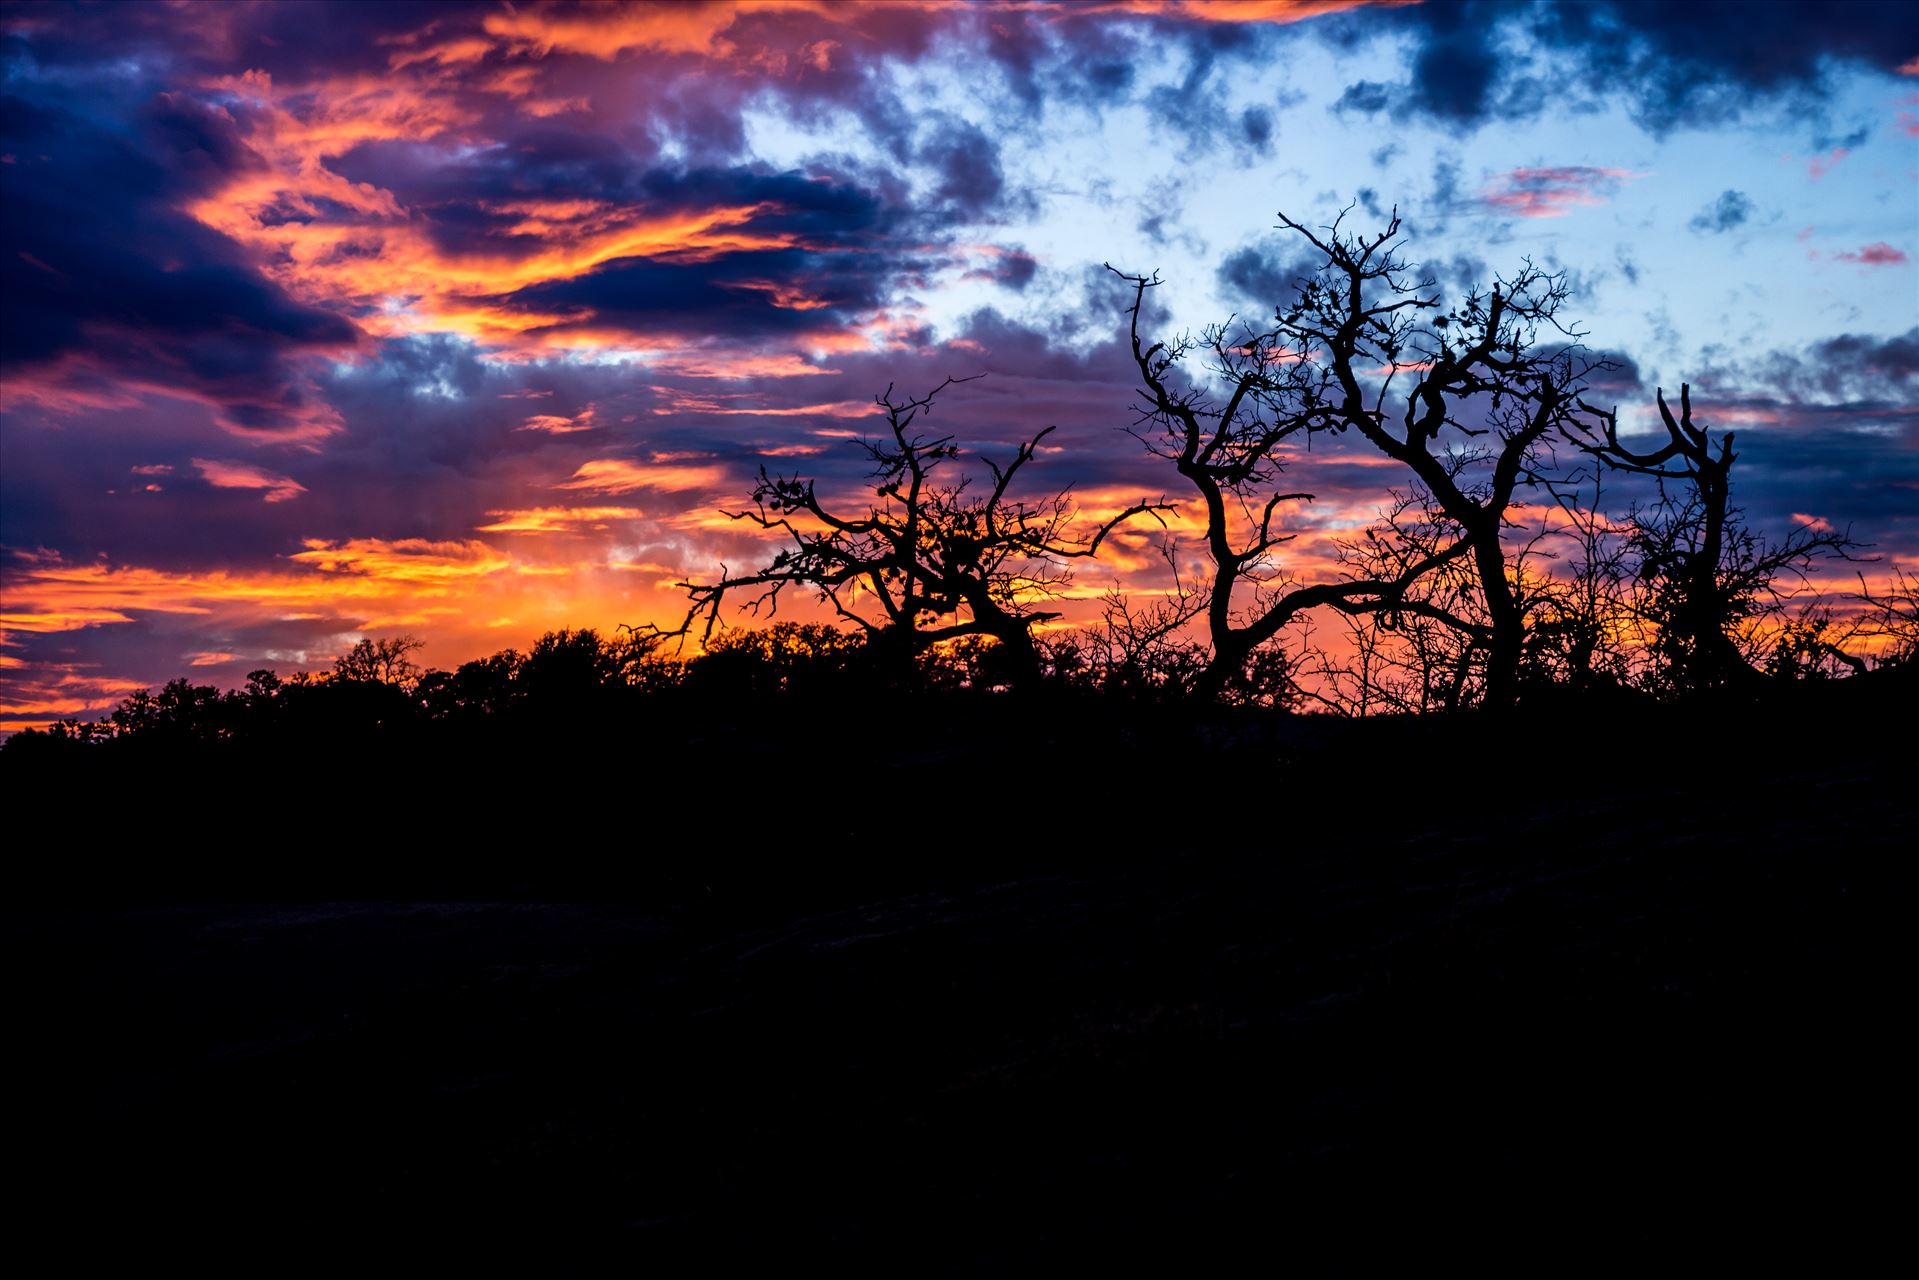 20140112-Enchanted Rock-DSLR-085.jpg  by Charles Smith Photography